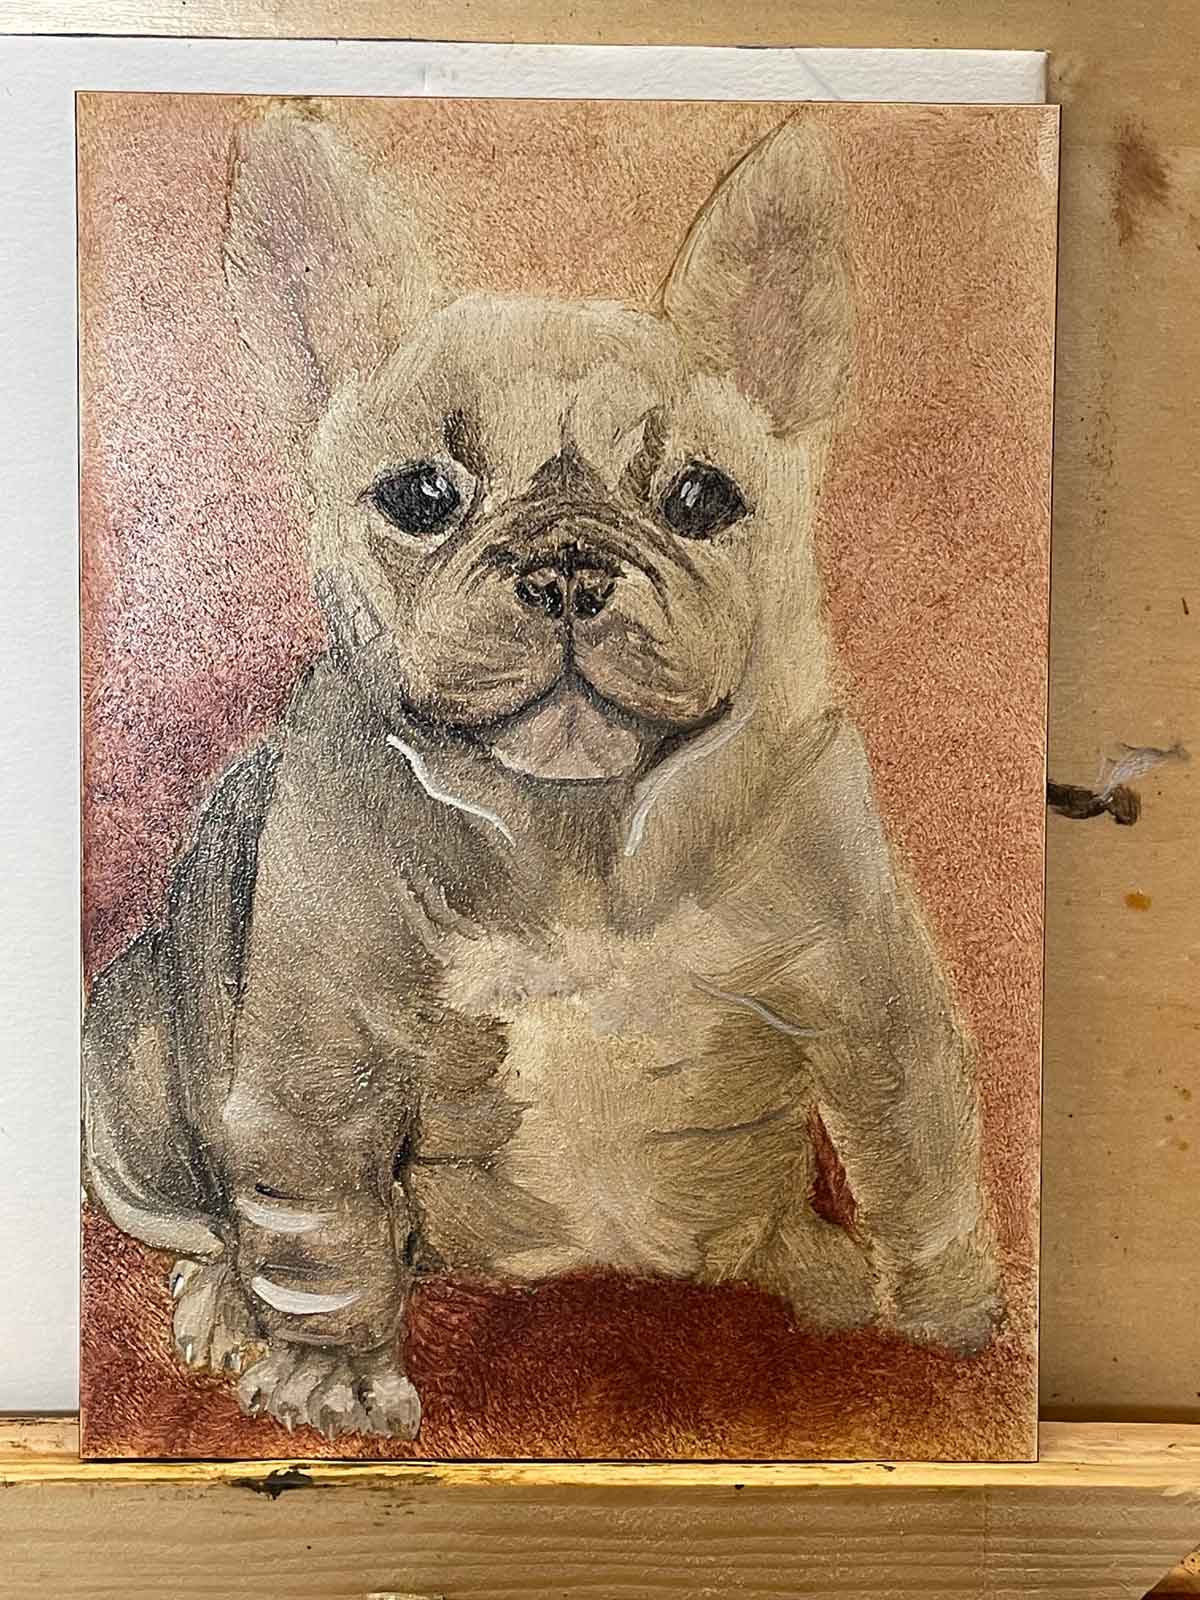 Now it looks more like I'm painting a French bulldog pup. It was looking pretty scary before.